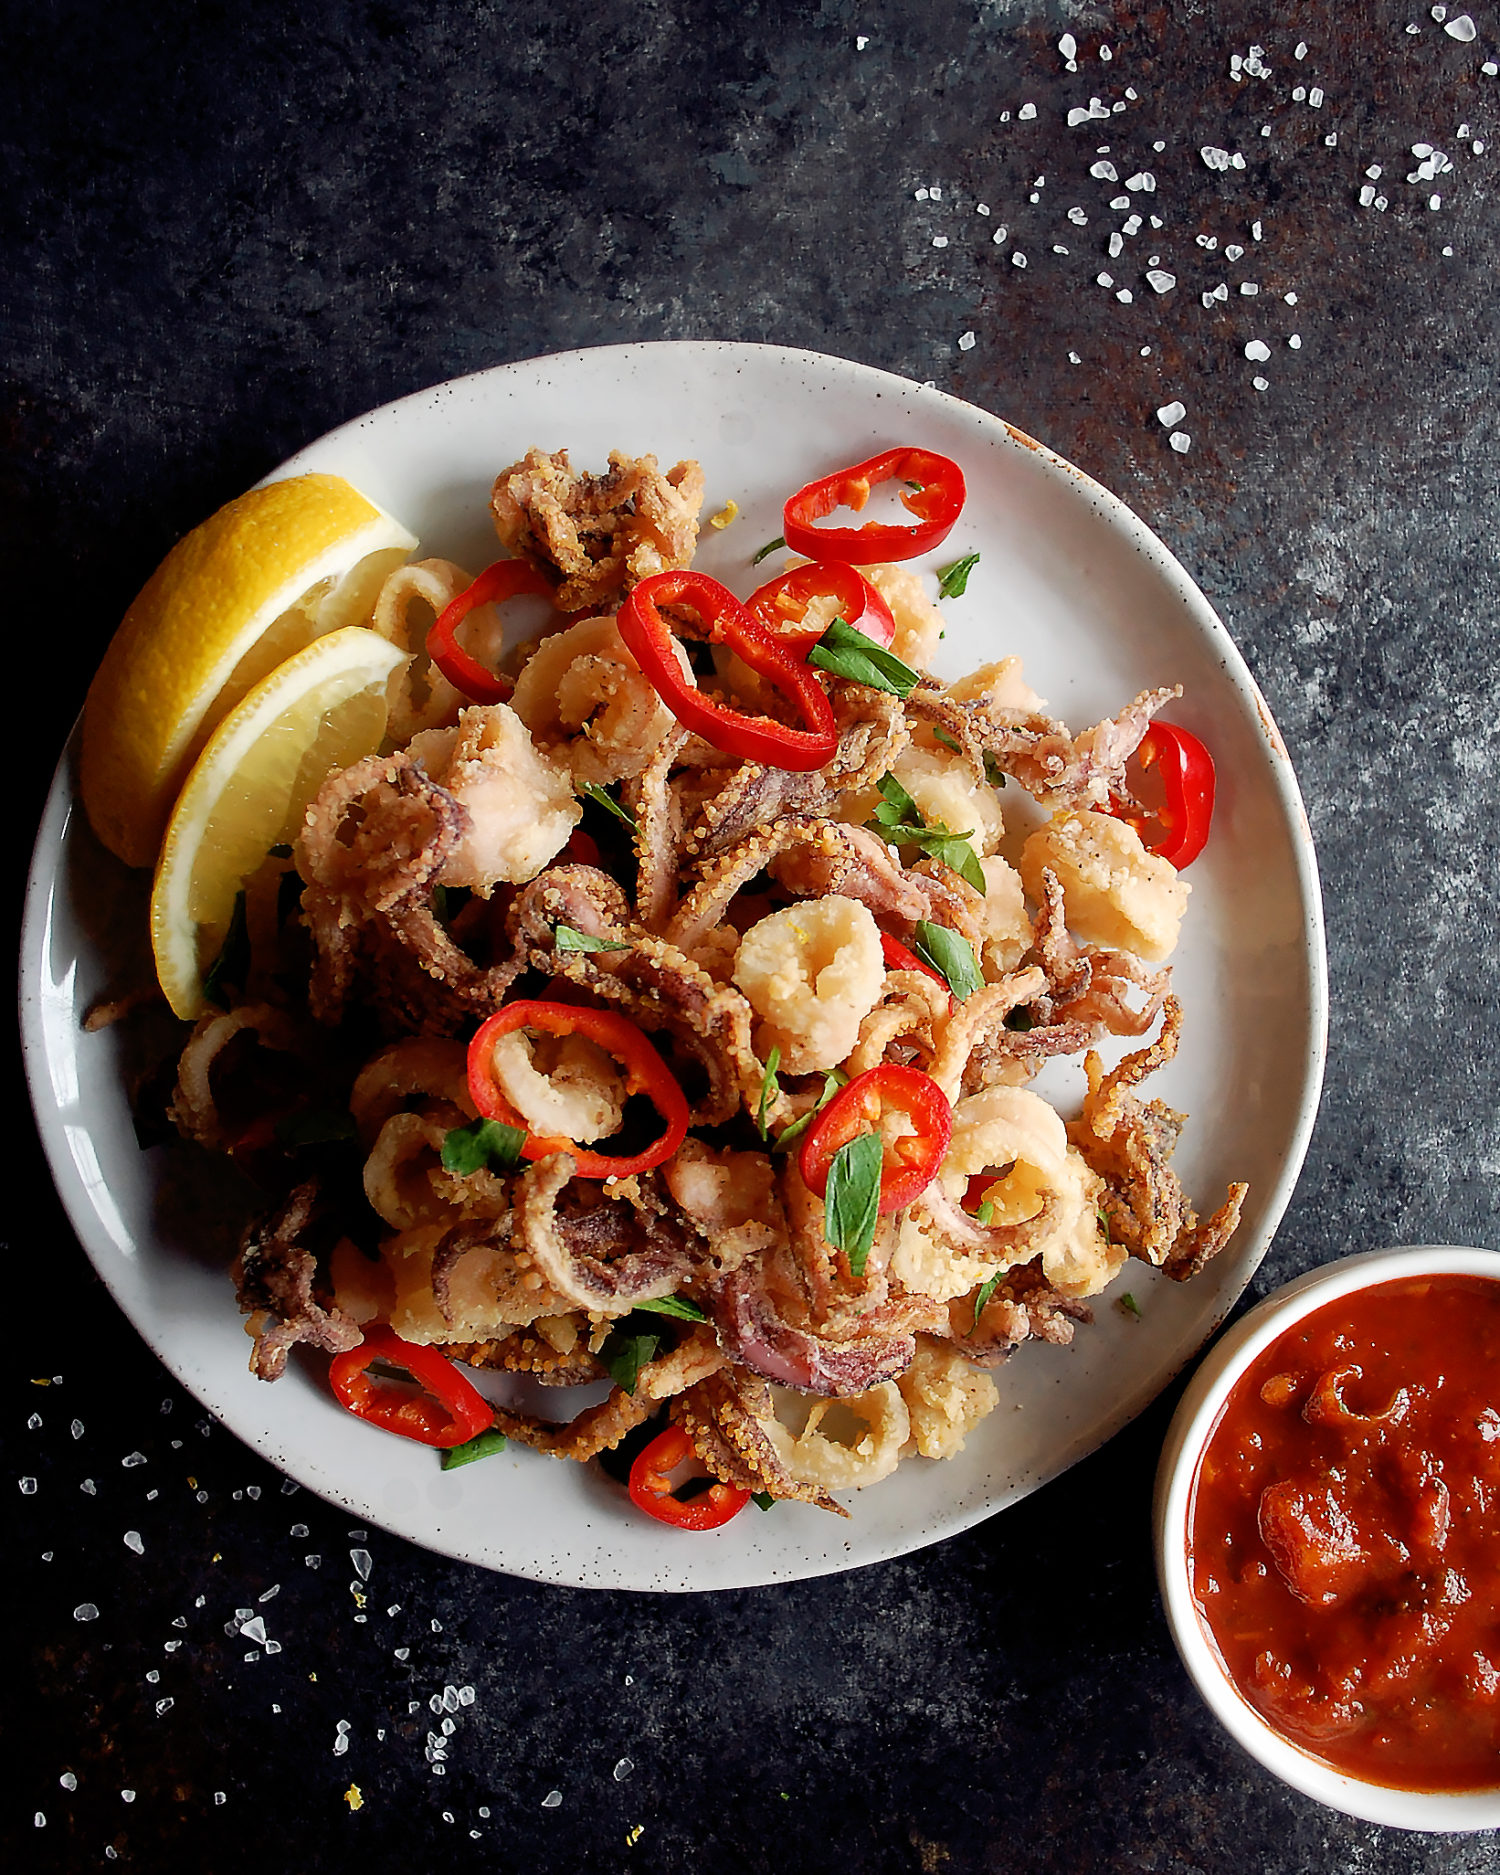 Fried Calamari with Pickled Red Fresno Chili Peppers - The Original Dish